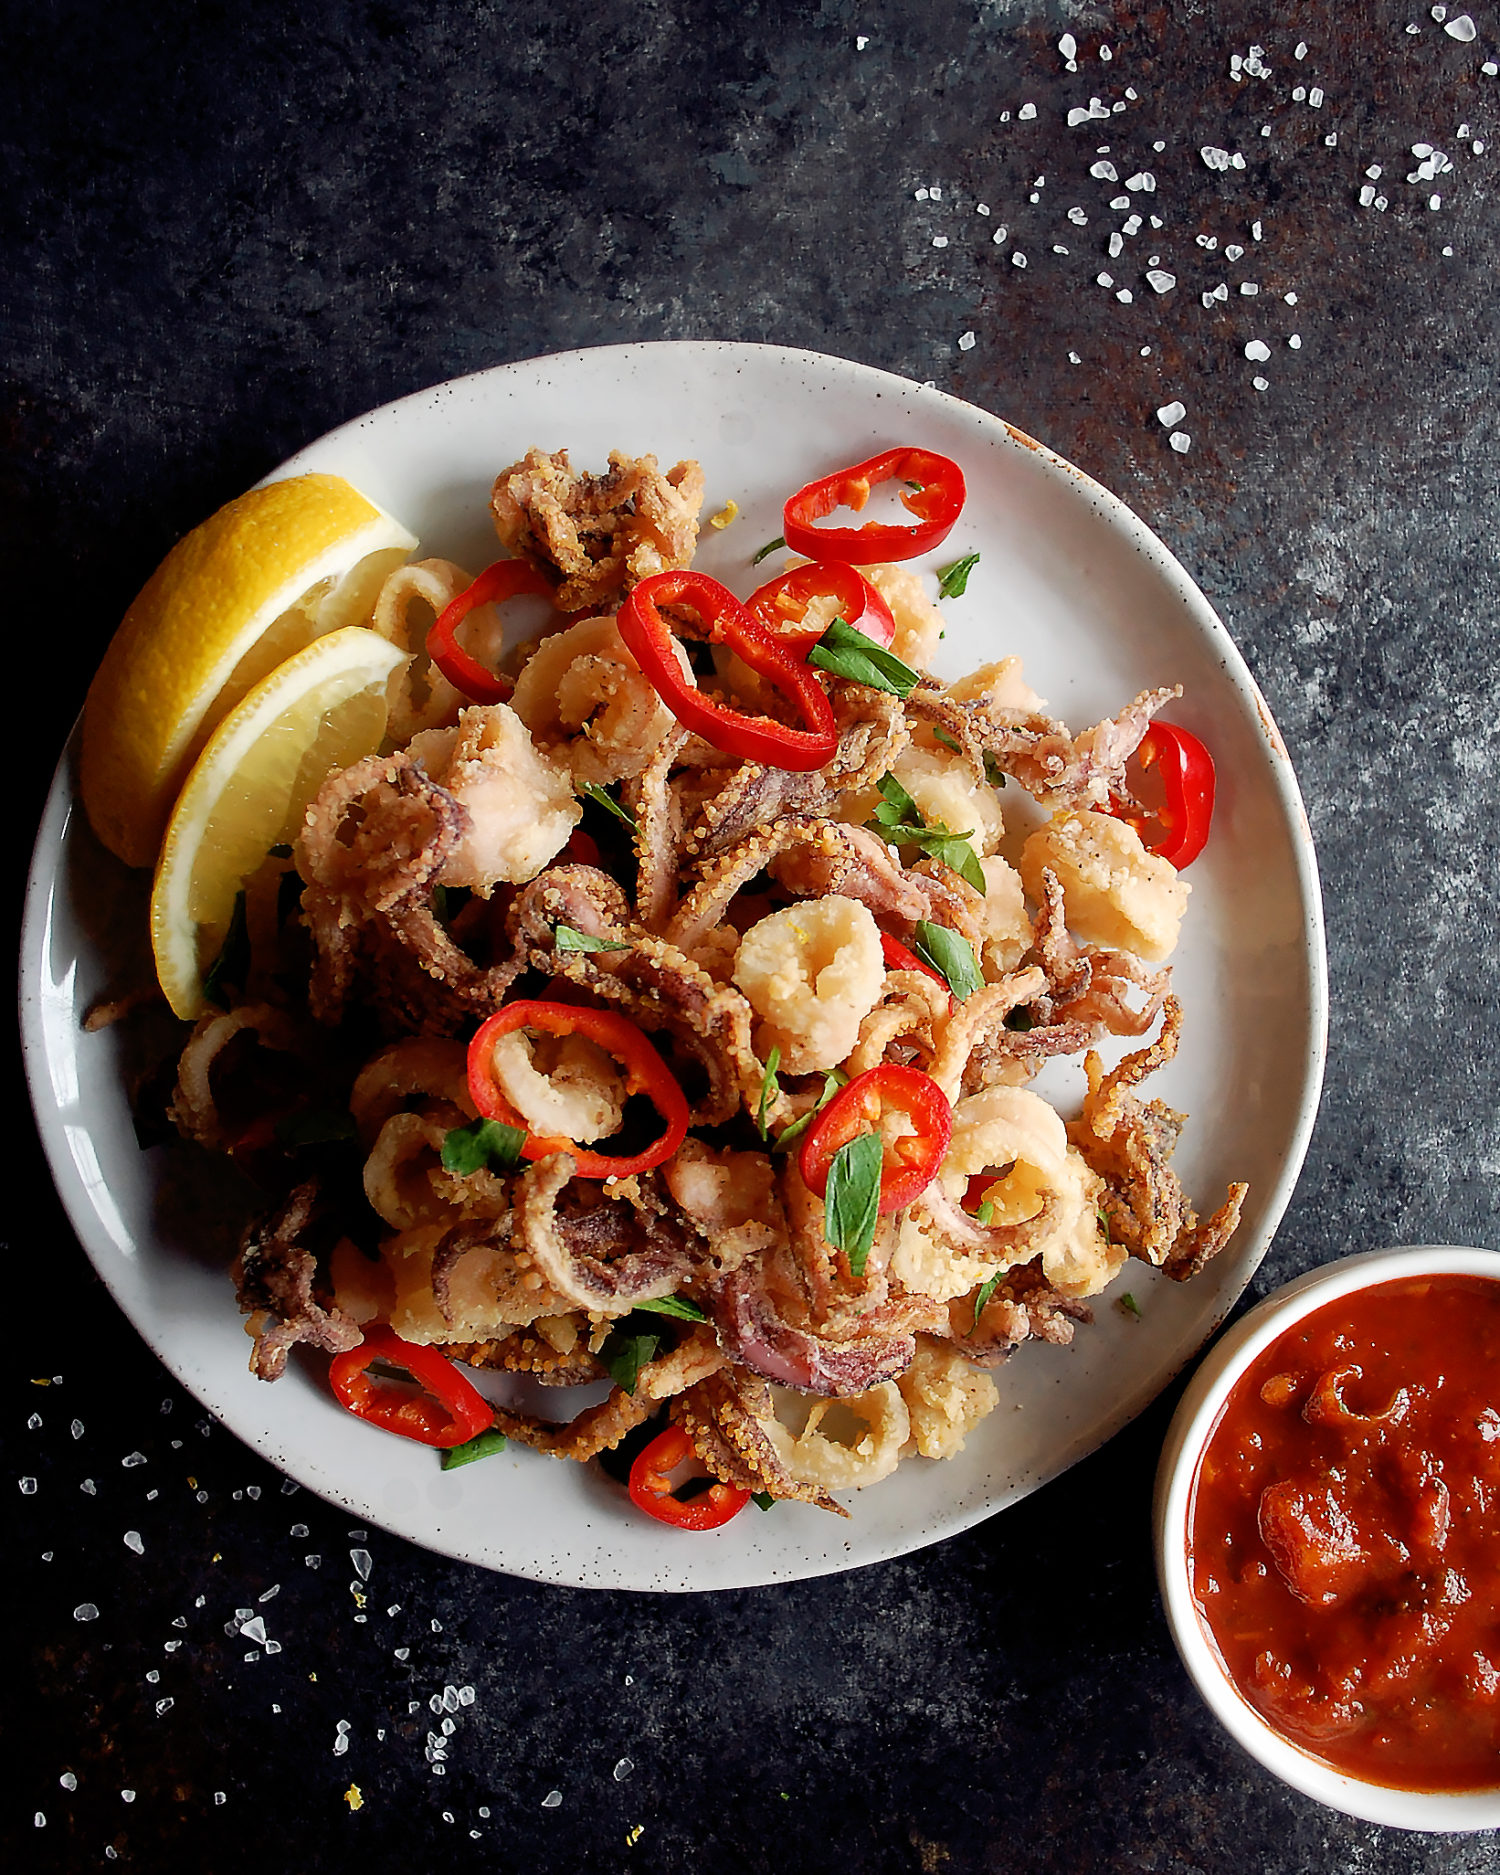 Fried Calamari with Pickled Red Fresno Chili Peppers - The Original Dish